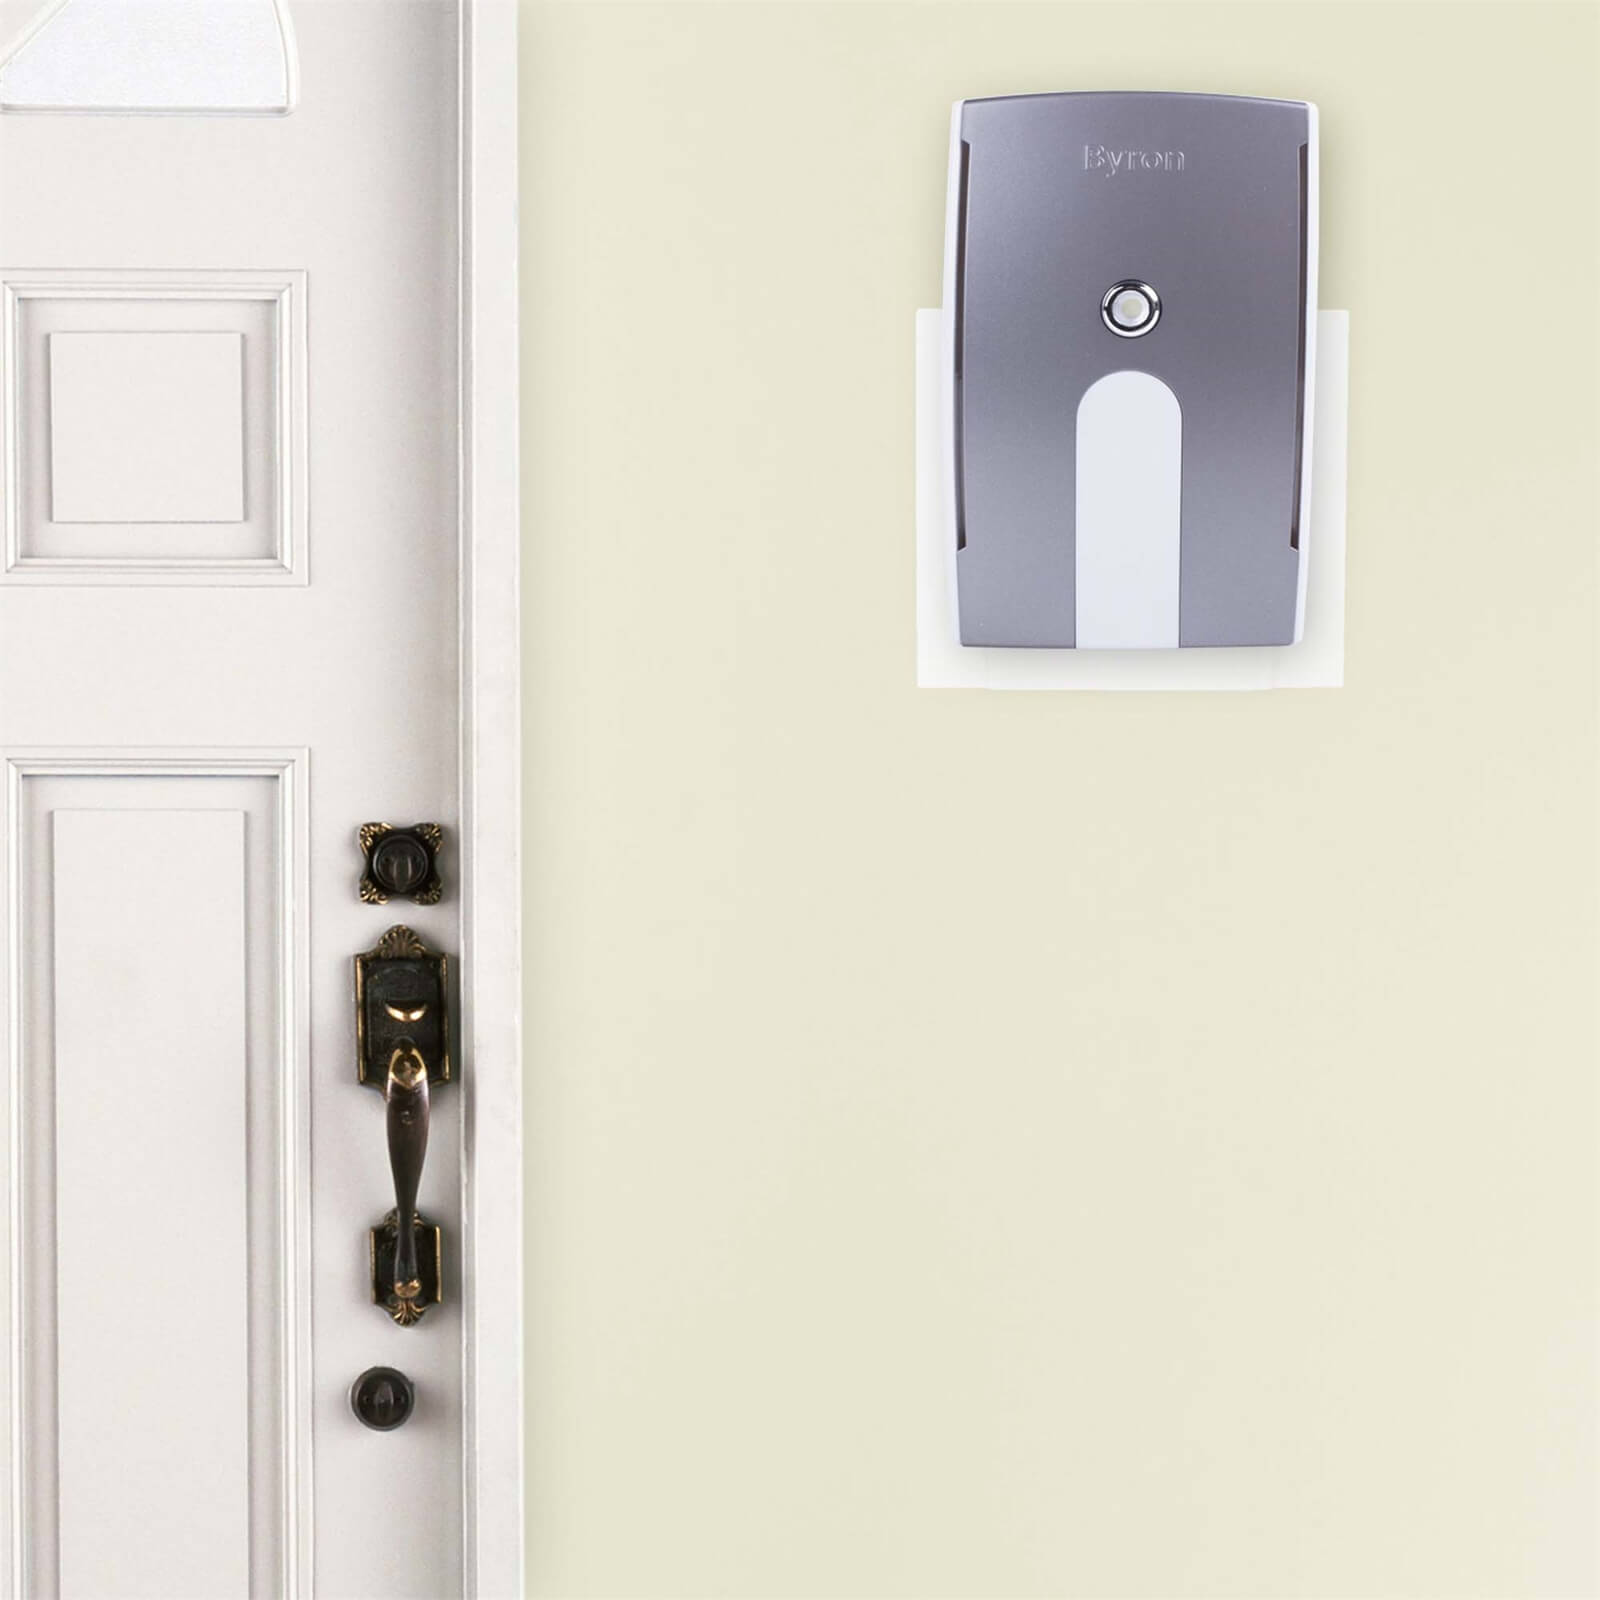 Byron BY514 Wireless Plug-In Chime Kit with Light